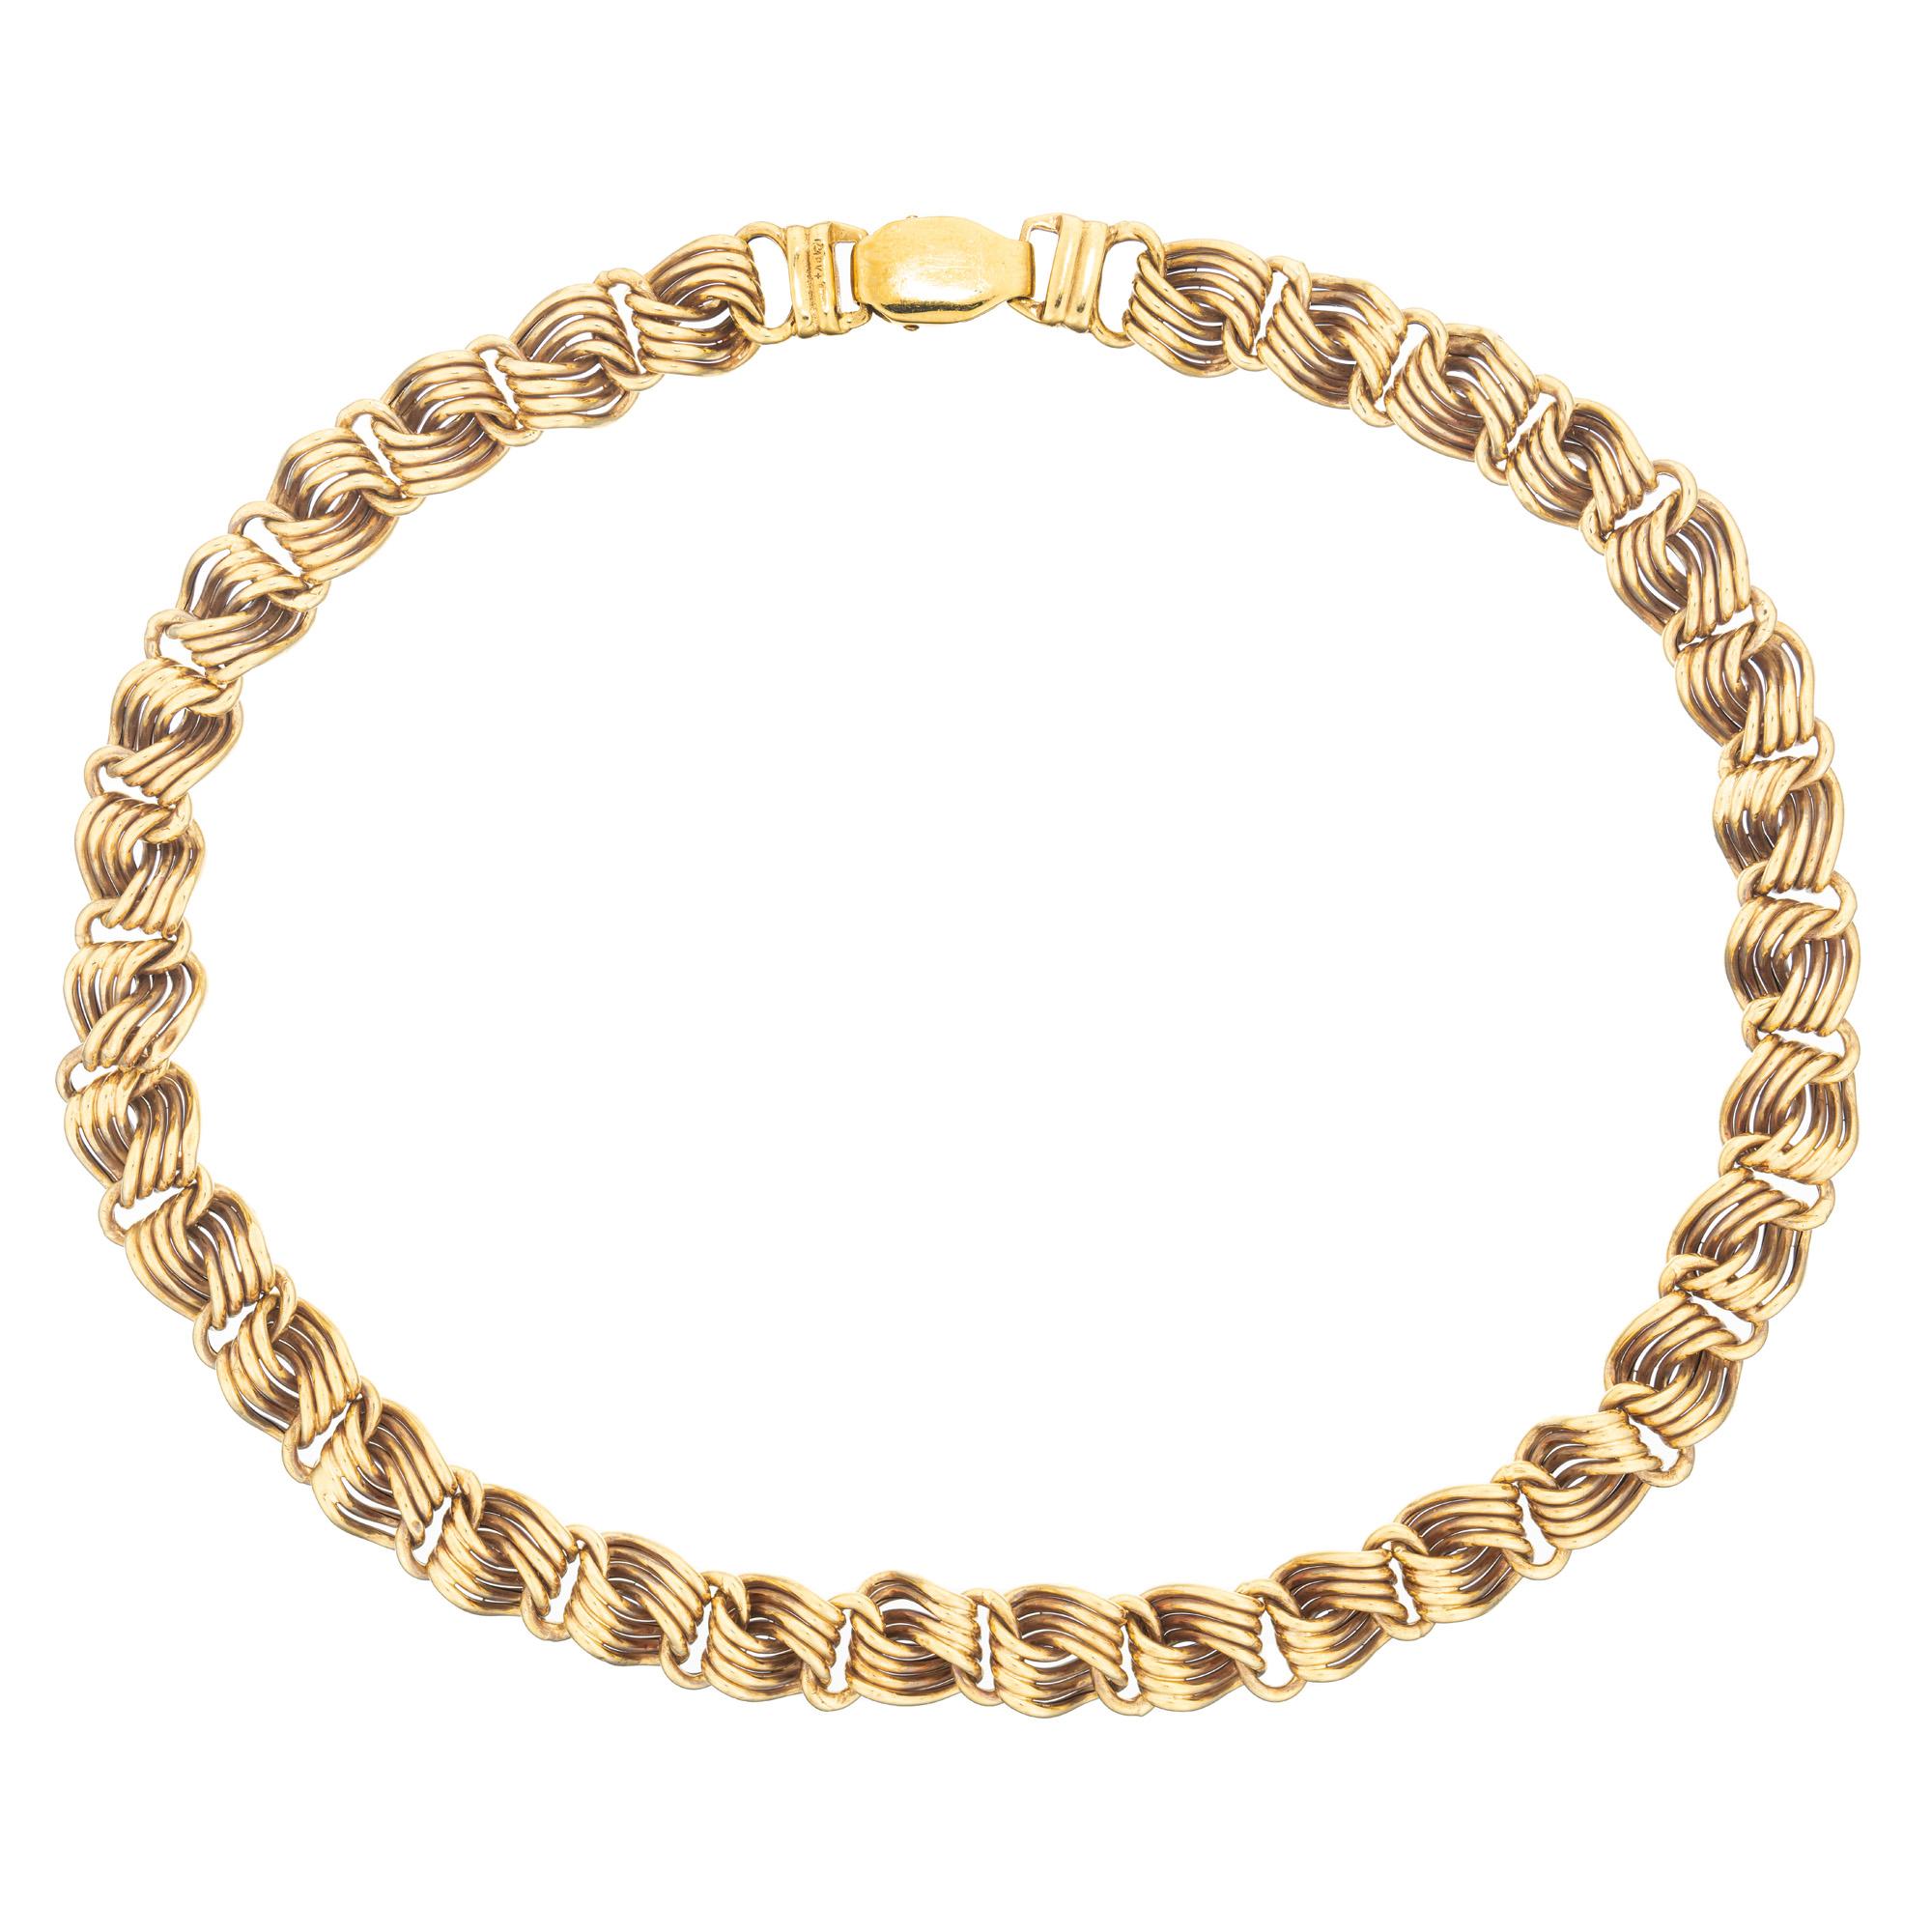 Vintage 1970's, Swirl Link Four Row 18k Yellow Gold Necklace, a truly magnificent piece that exudes elegance. Made from 18k yellow gold, this necklace is made from groups of four intricate swirl links. Measuring at 16.5 inches in length.  The secure